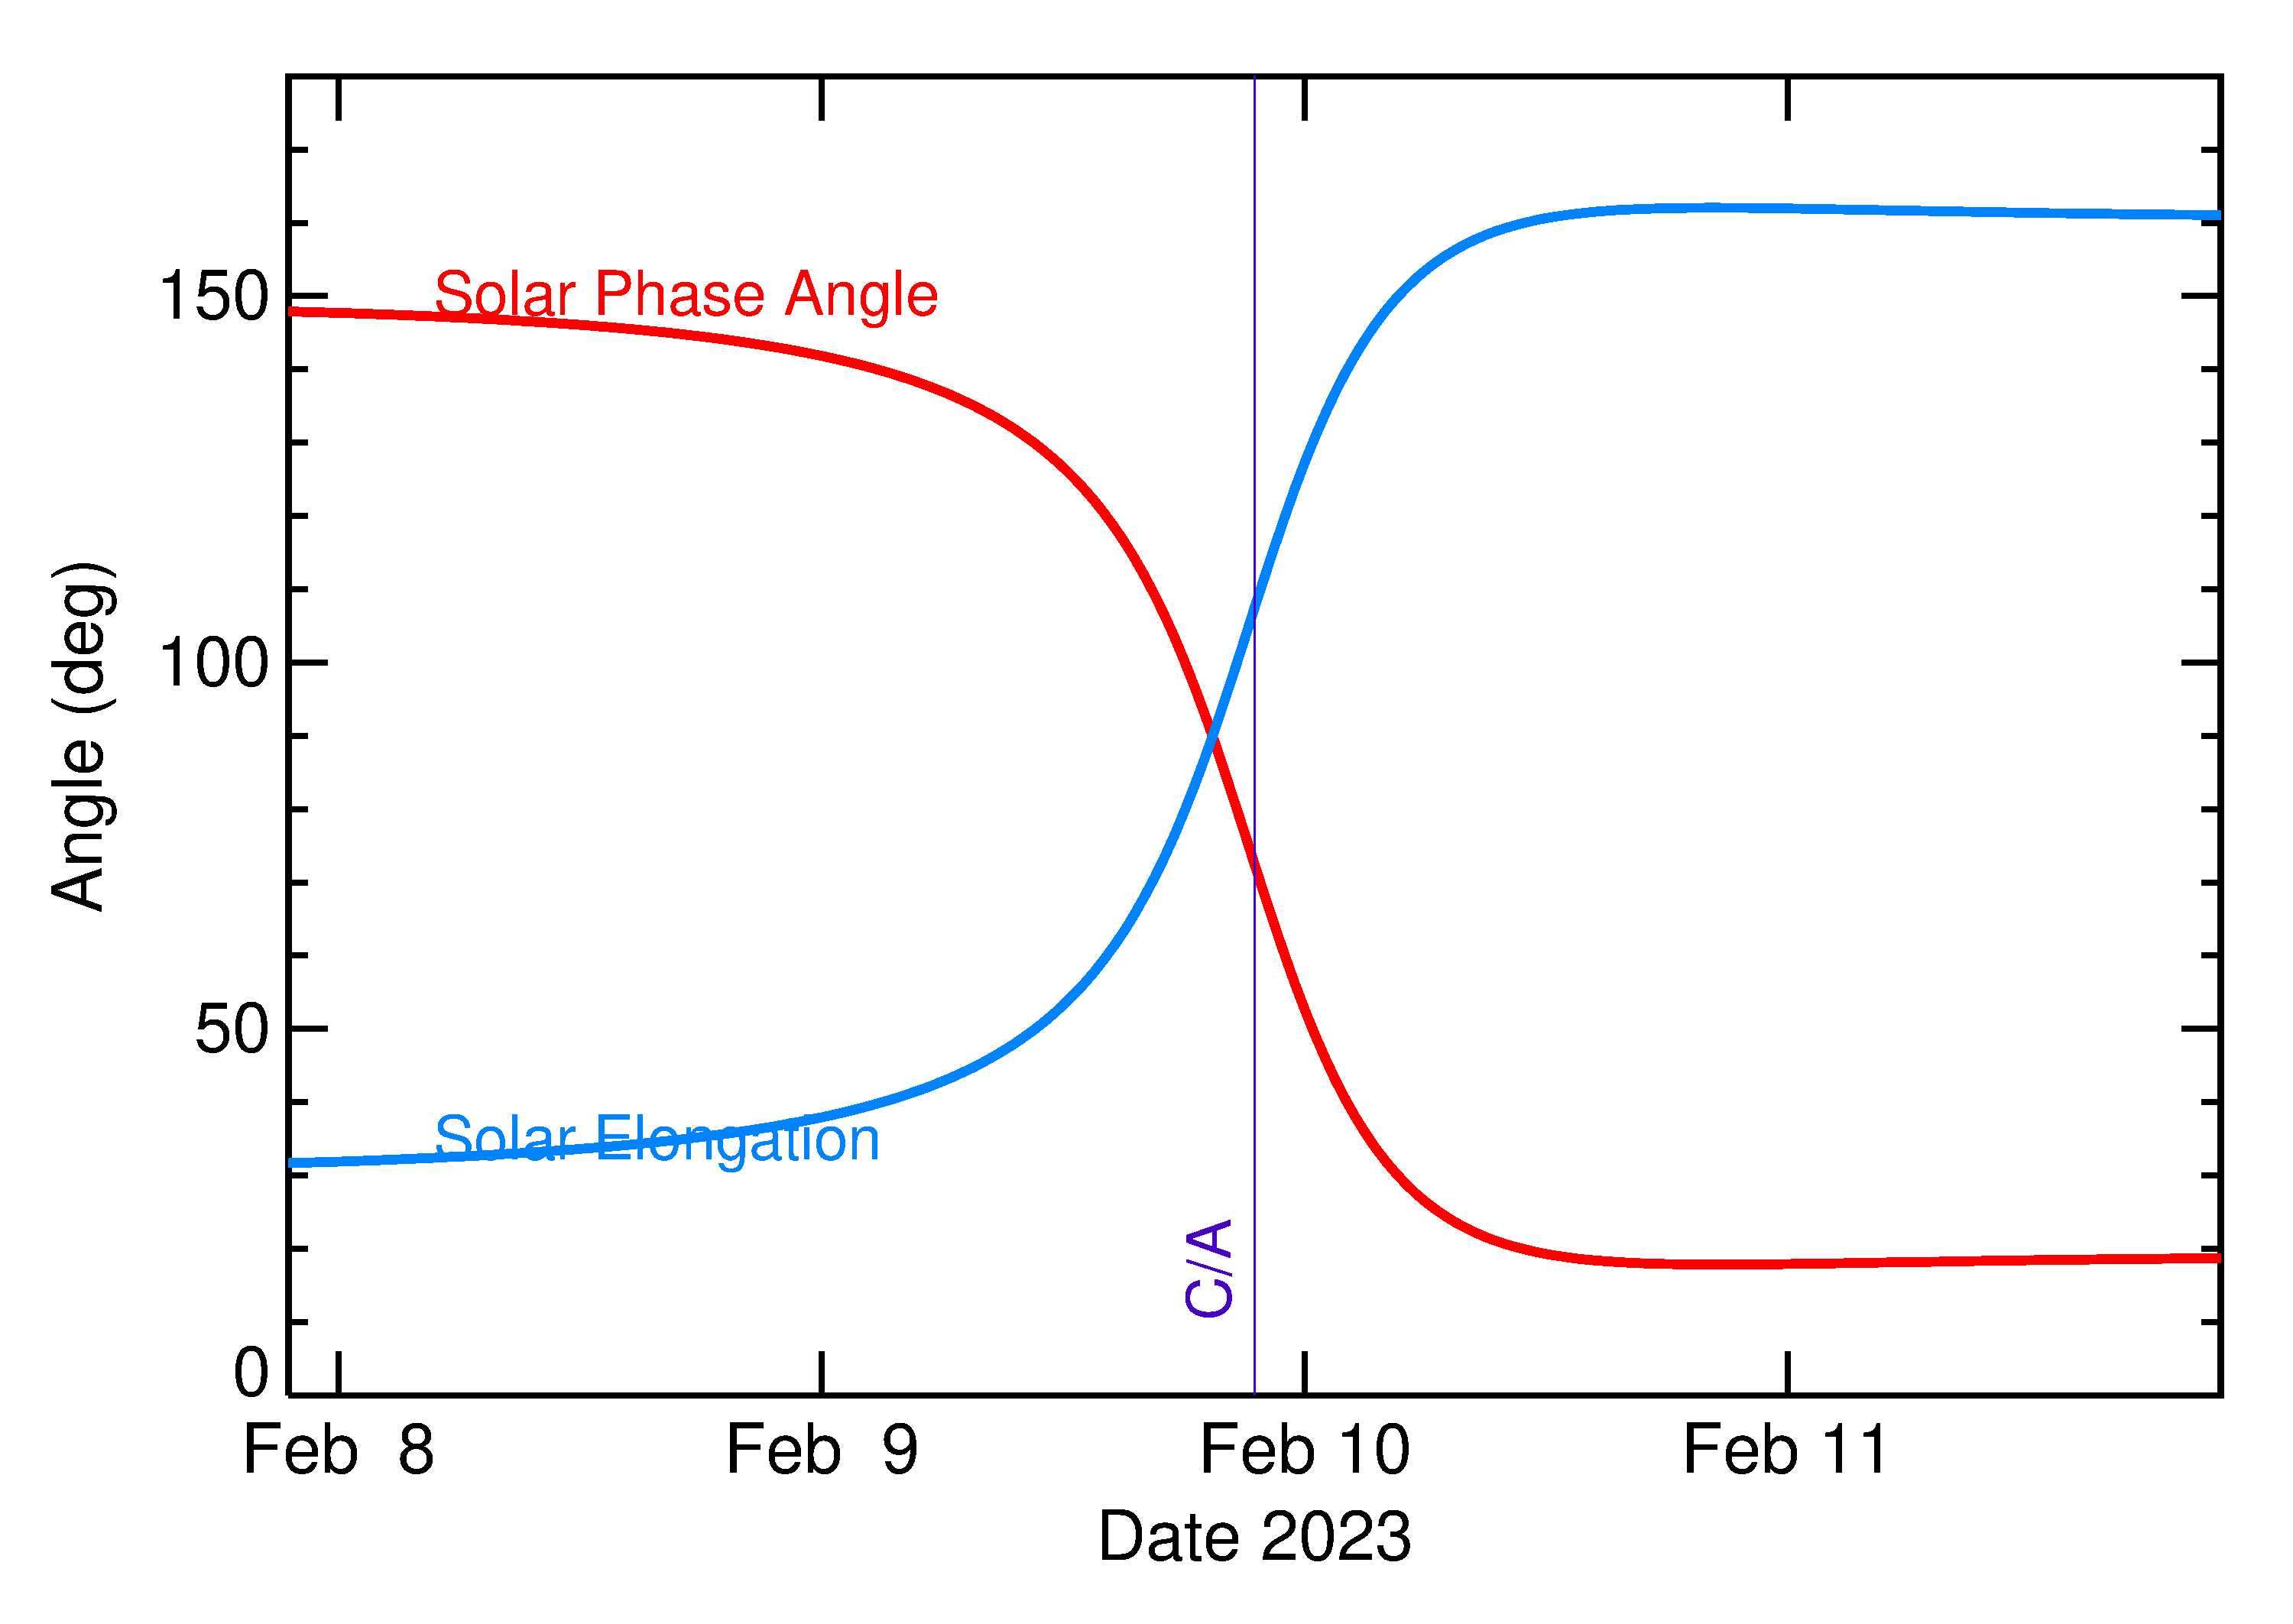 Solar Elongation and Solar Phase Angle of 2023 CG4 in the days around closest approach